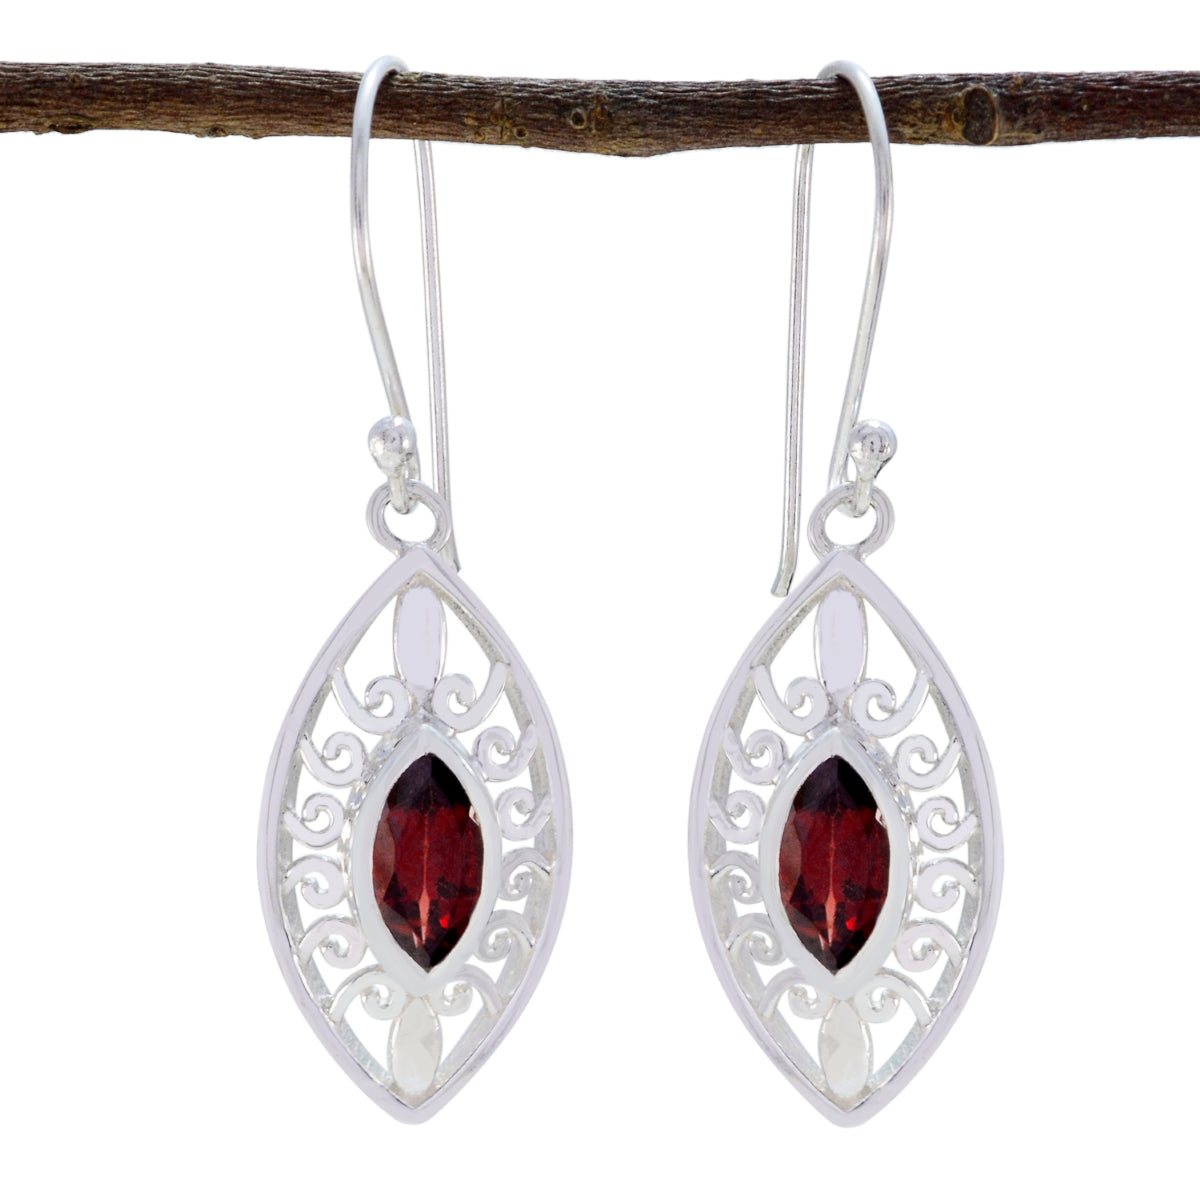 Riyo Nice Gemstone Marquise Faceted Red Garnet Silver Earrings mother's day gift